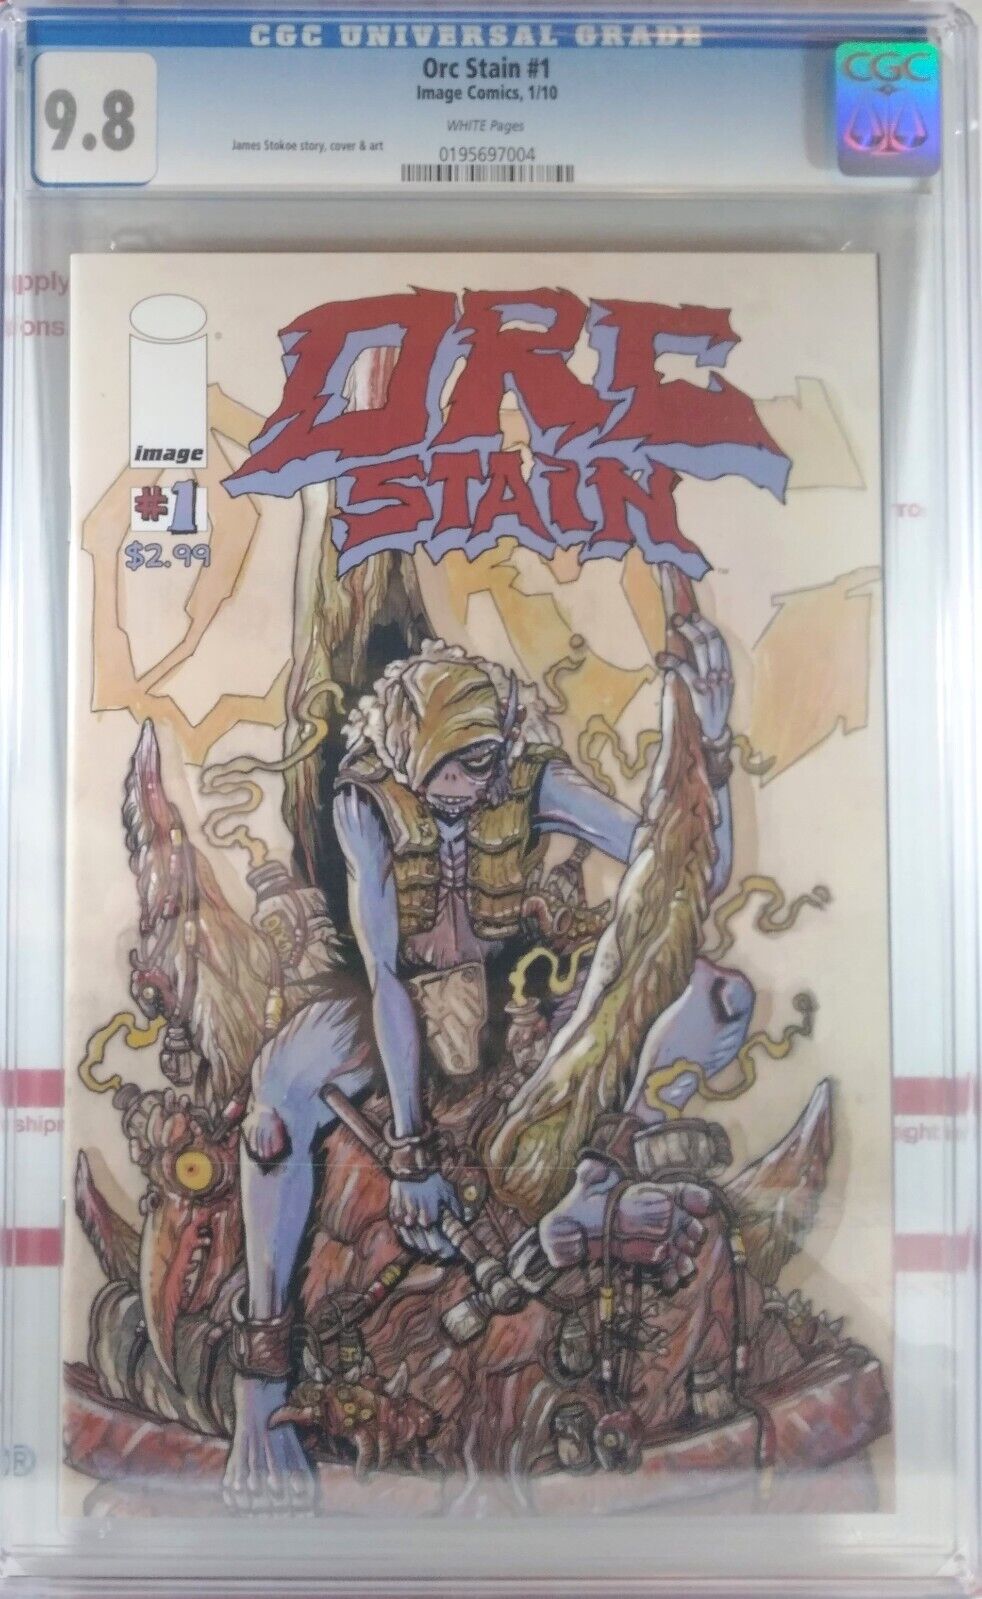 🔥 CGC 9.8 NM/MT ORC STAIN #1 SCARCE James Stokoe IMAGE COMICS 2010 FIRST PRINT